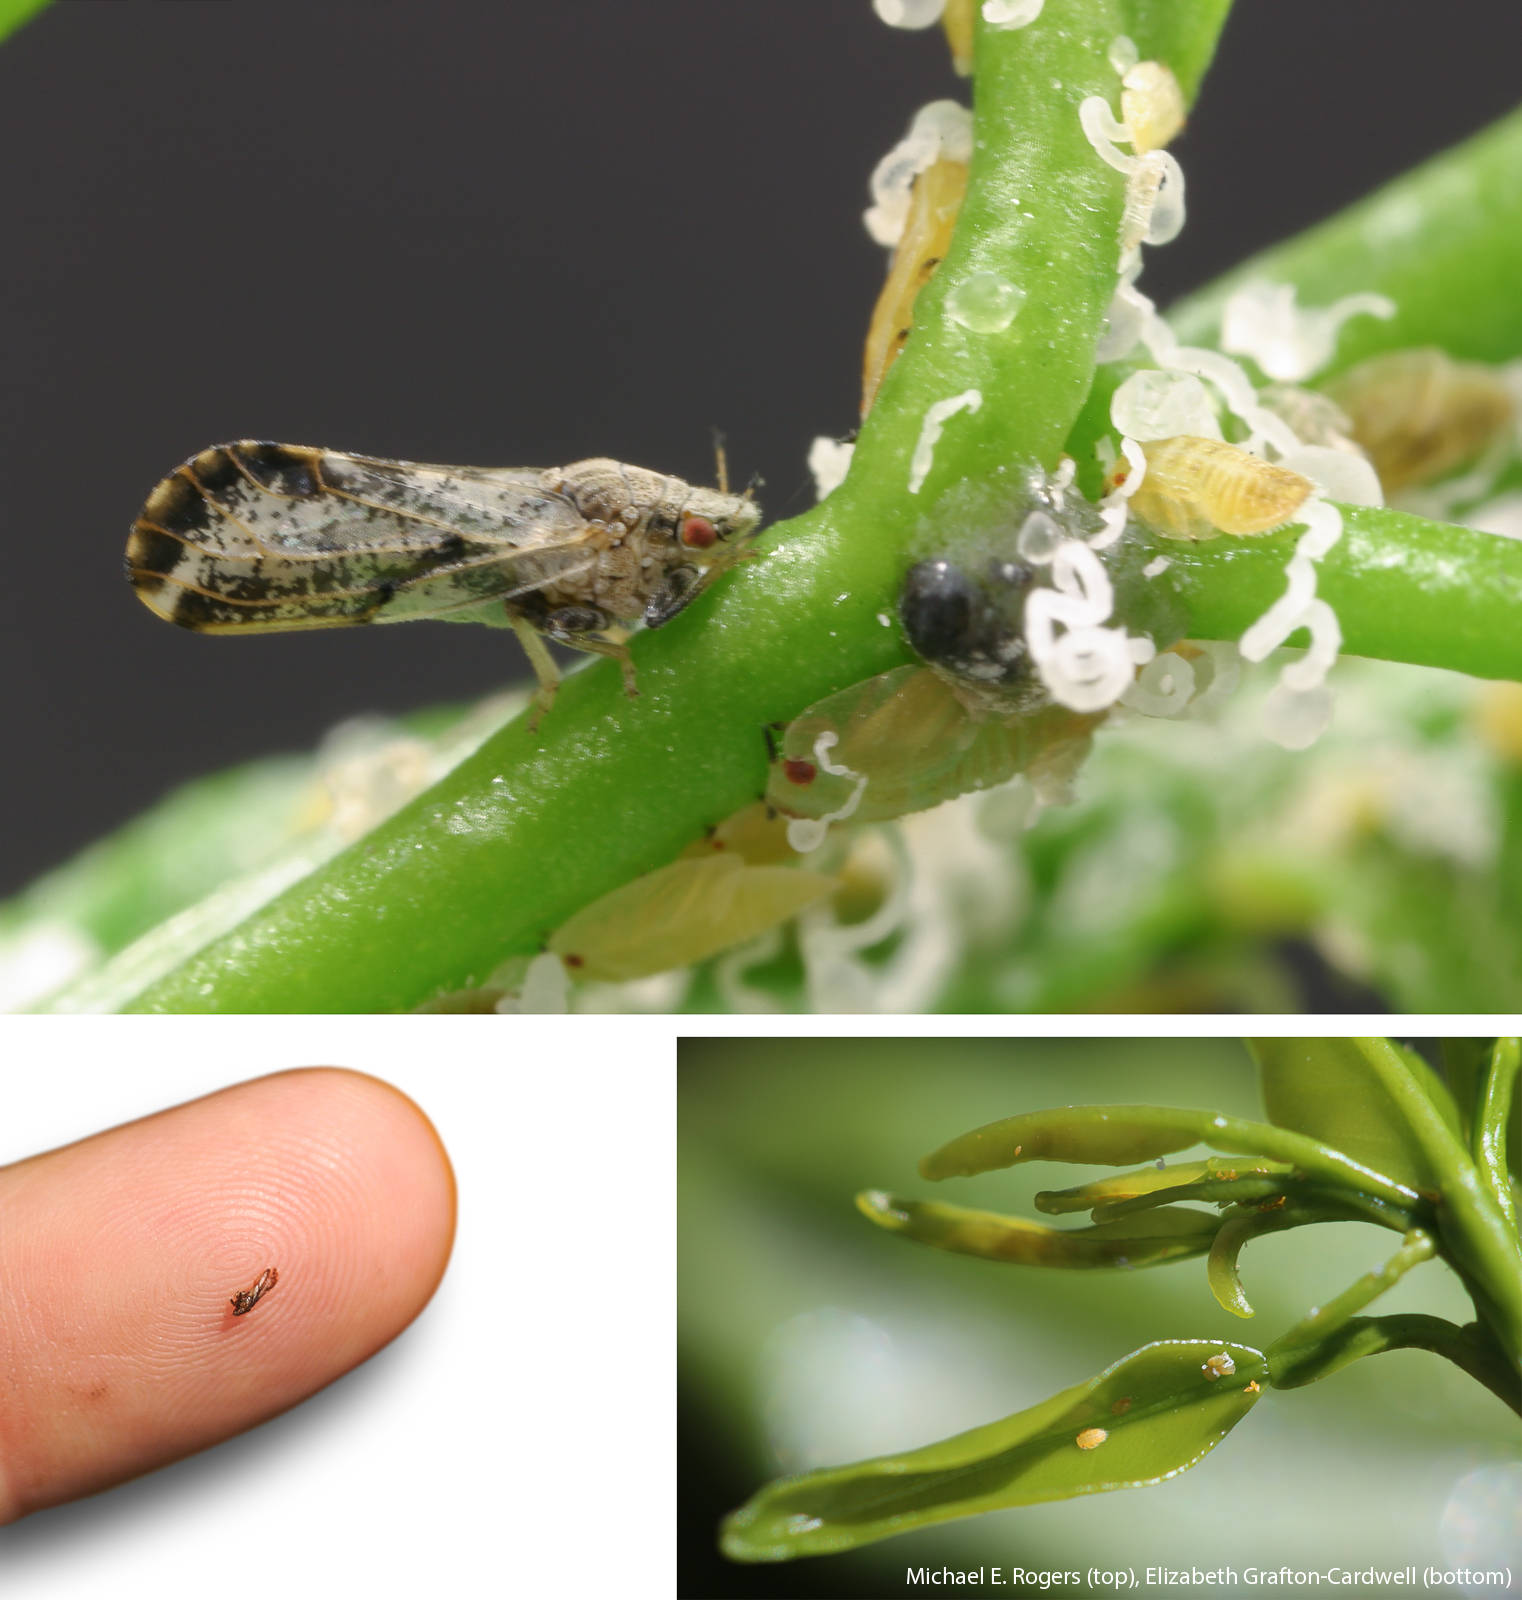 Top, Asian citrus psyllid adult and nymphs. Middle, adult psyllid on finger. Bottom, nymphs tucked down in new leaves.